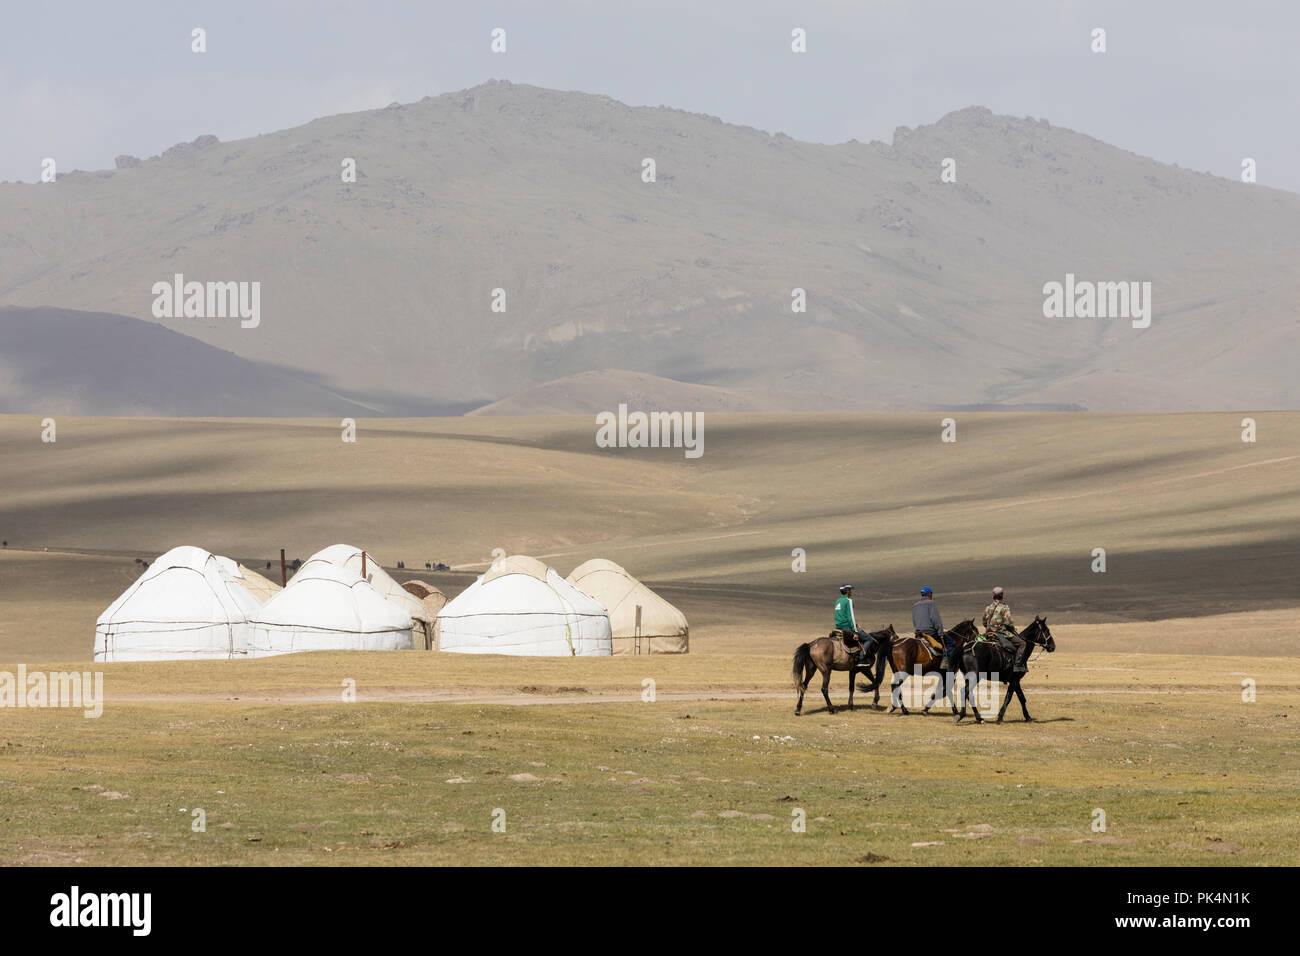 Song Kul, Kyrgyzstan, August 8 2018: Three Kyrgyz people ride their horses through the steppe at Song Kul Lake in Kyrgyzstan Stock Photo